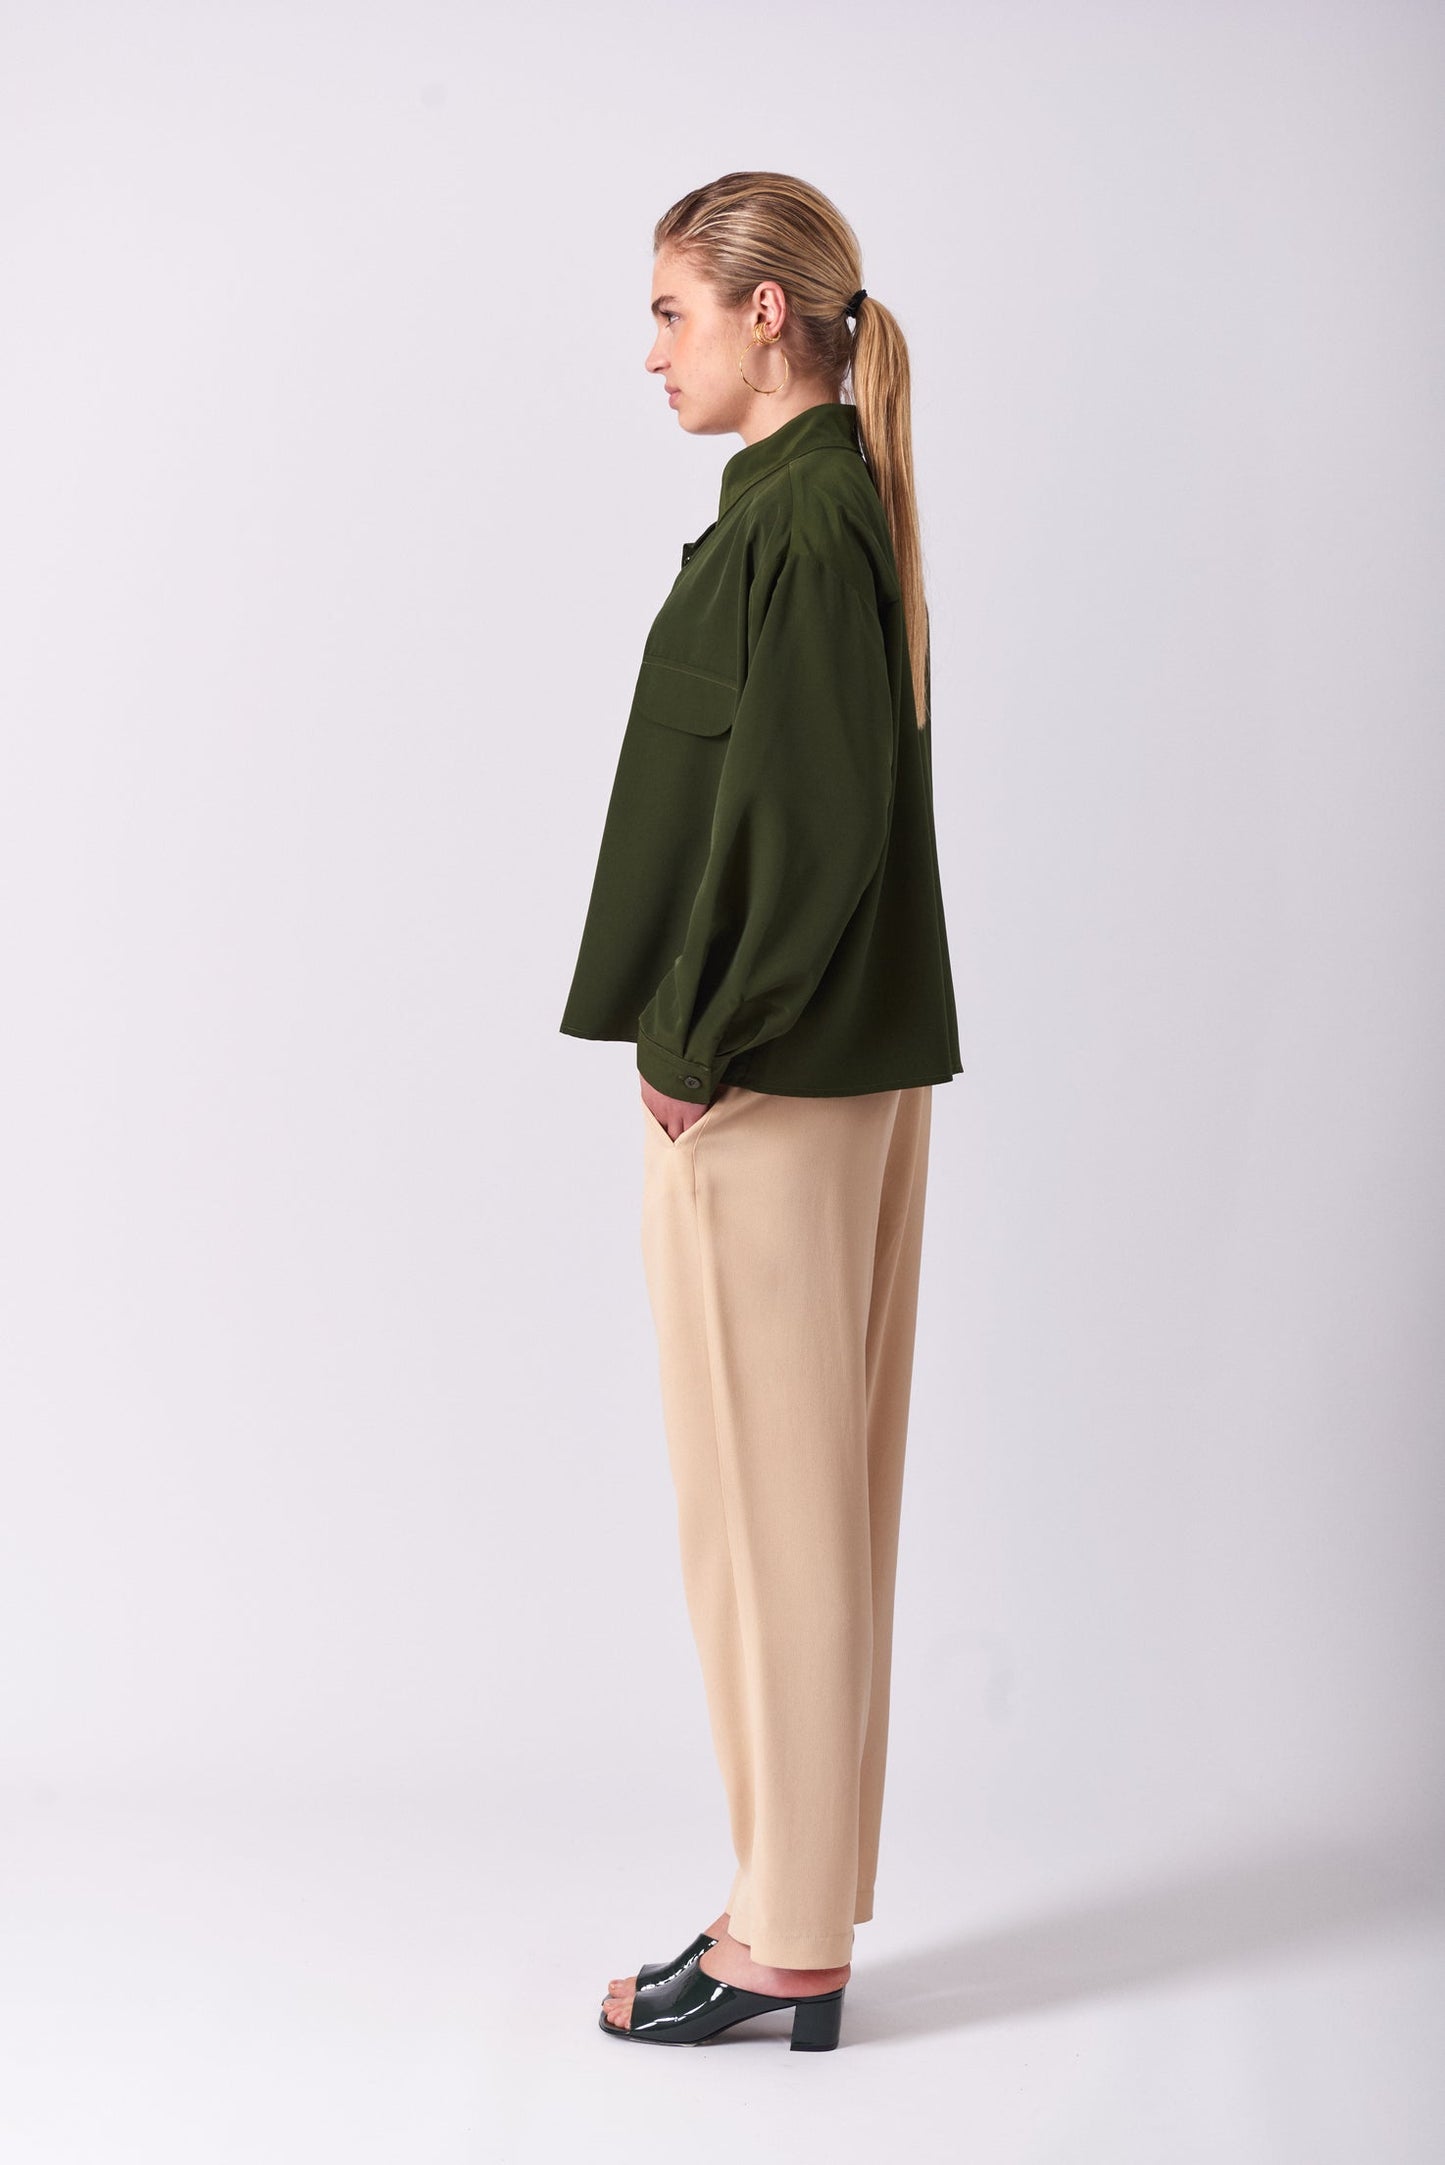 Top 12 Long Sleeved Shirt | Olive